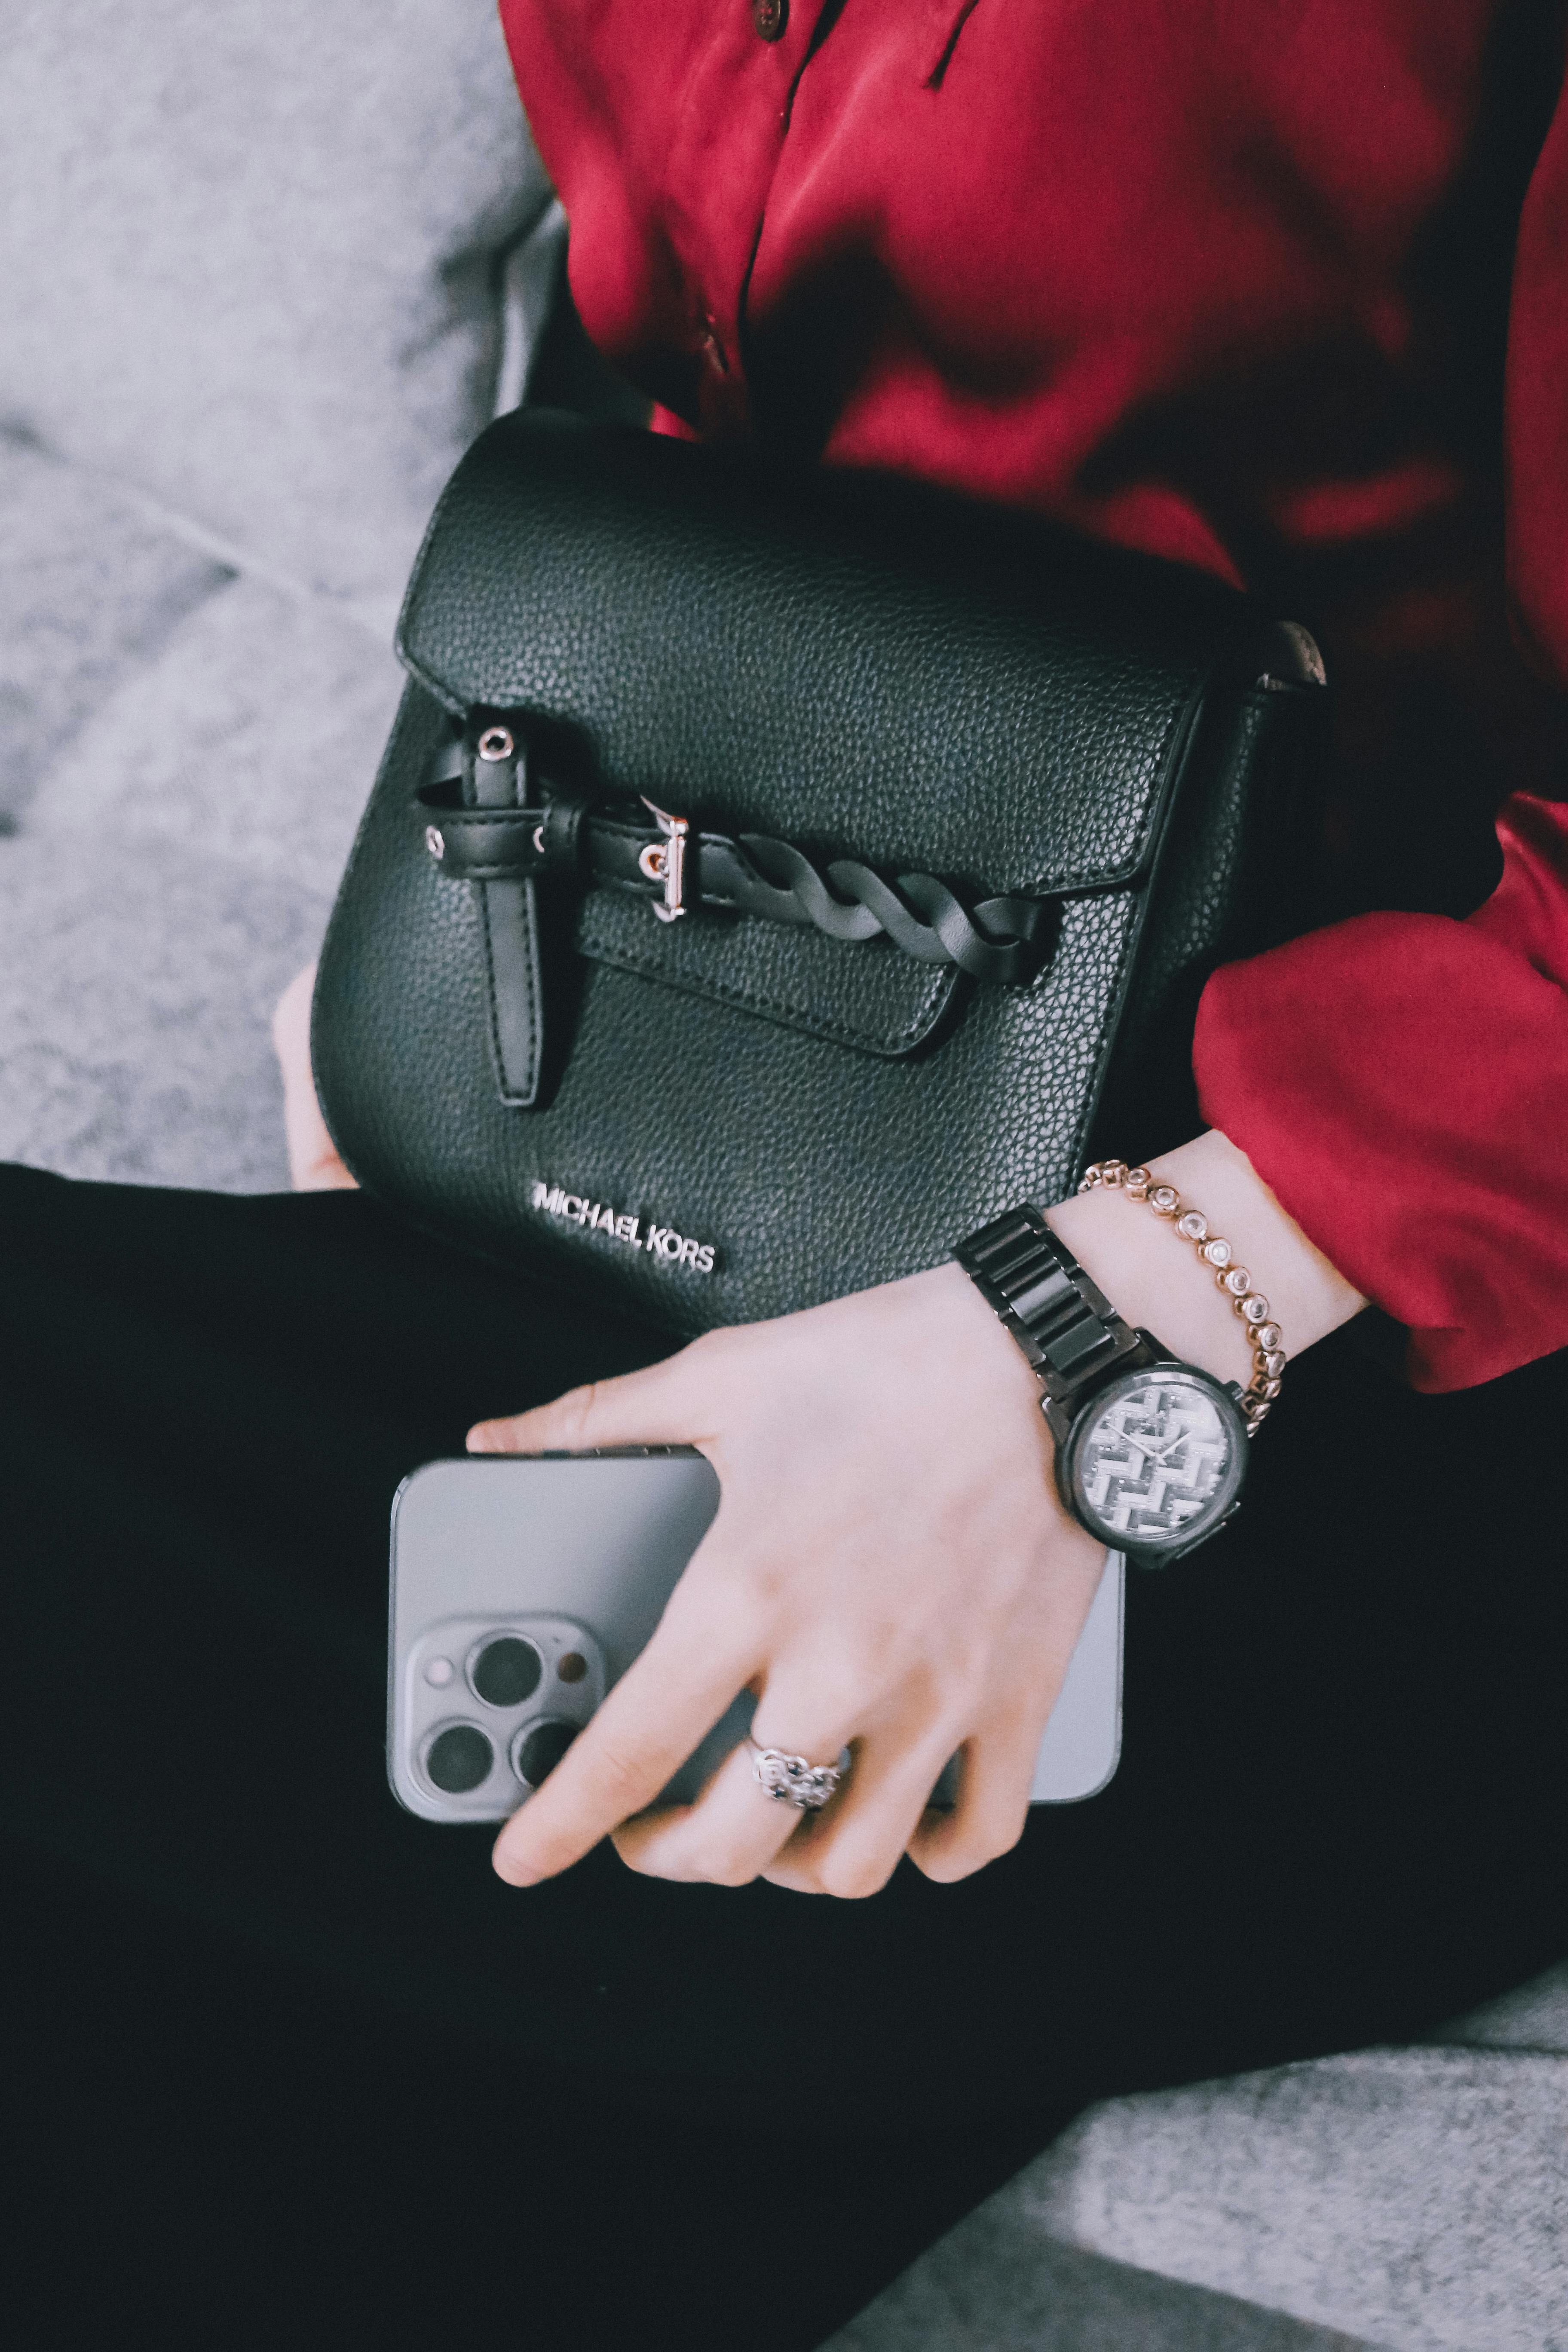 A woman with an expensive watch, jewelry, phone, and bag | Source: Pexels